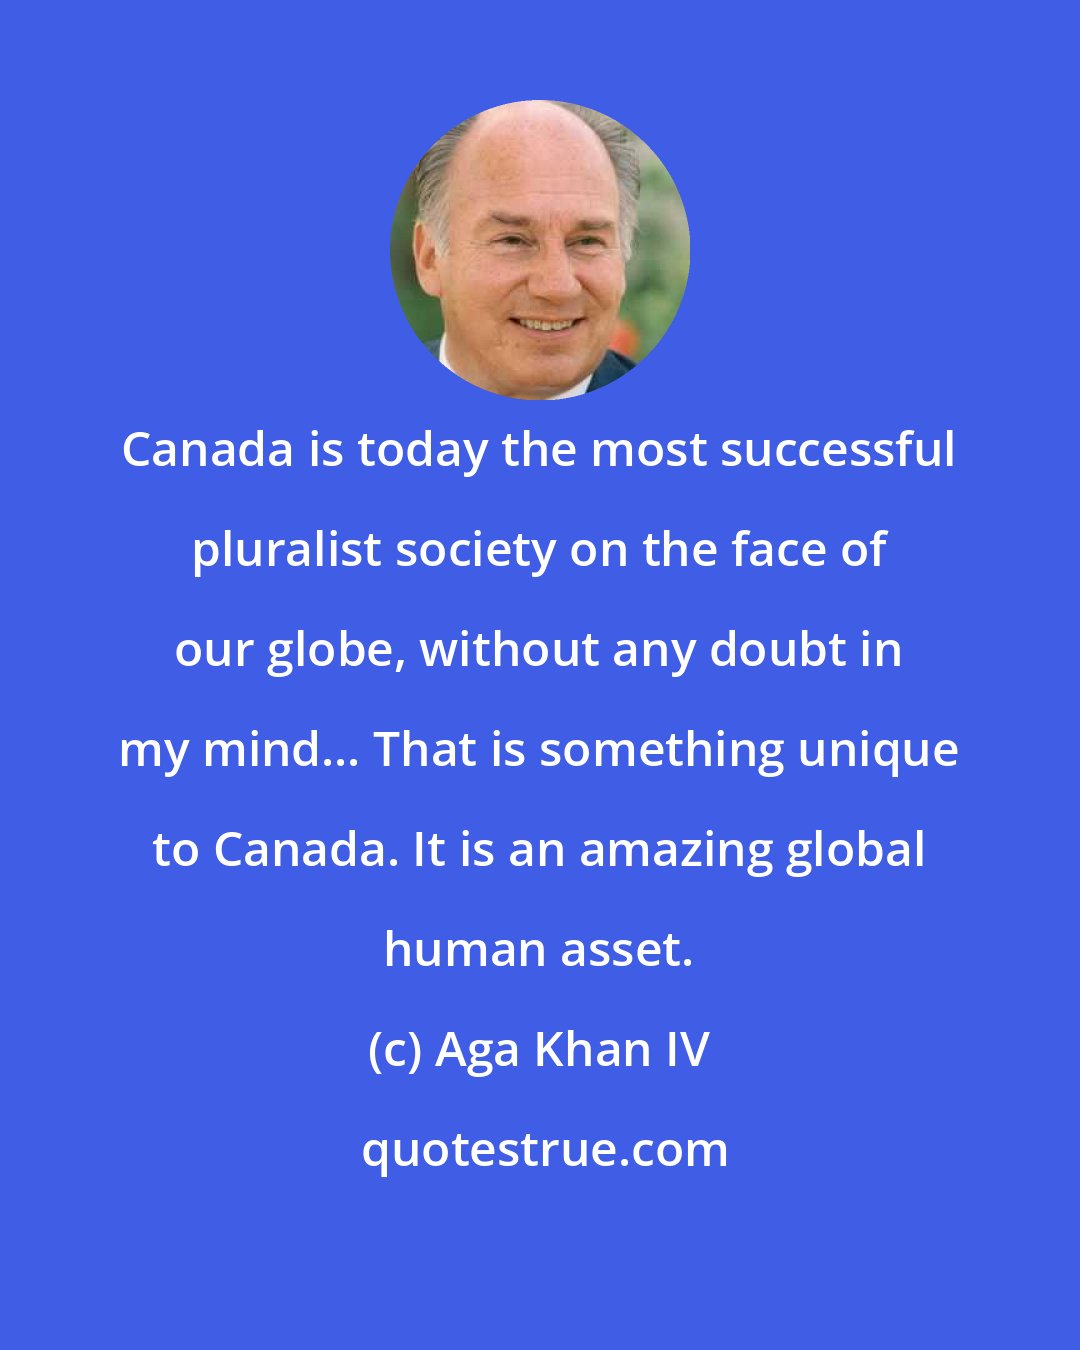 Aga Khan IV: Canada is today the most successful pluralist society on the face of our globe, without any doubt in my mind... That is something unique to Canada. It is an amazing global human asset.